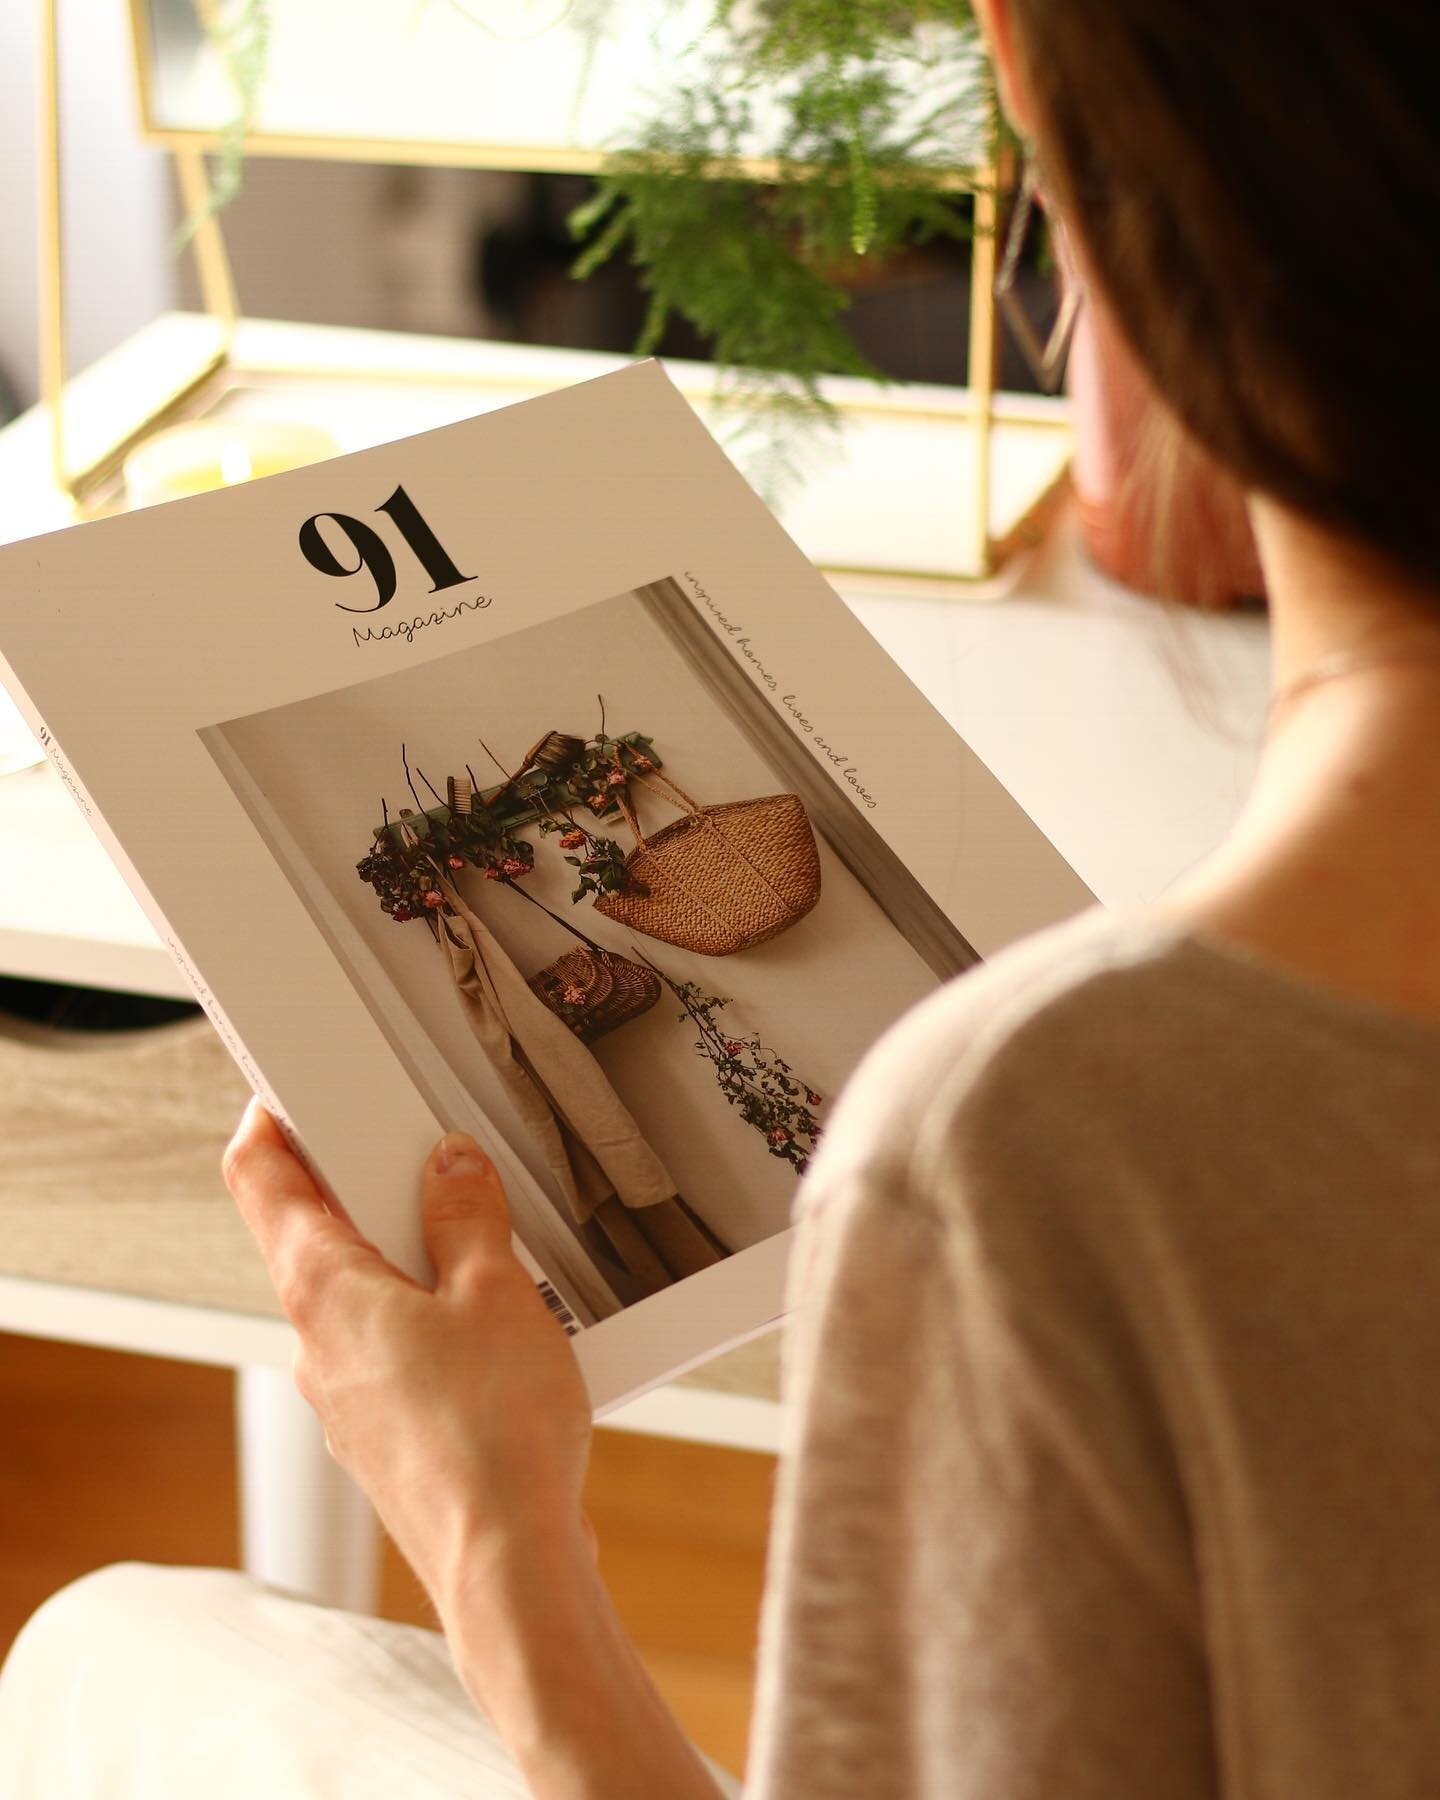 ✨We are so happy to be featured in the latest issue of @91magazine , which is known for highlighting the best in design, lifestyle, and creativity. Thank you, 91 Magazine for this wonderful opportunity! 💛✨
.
.
.
.
.
.
.
#featured #91magazine #candle